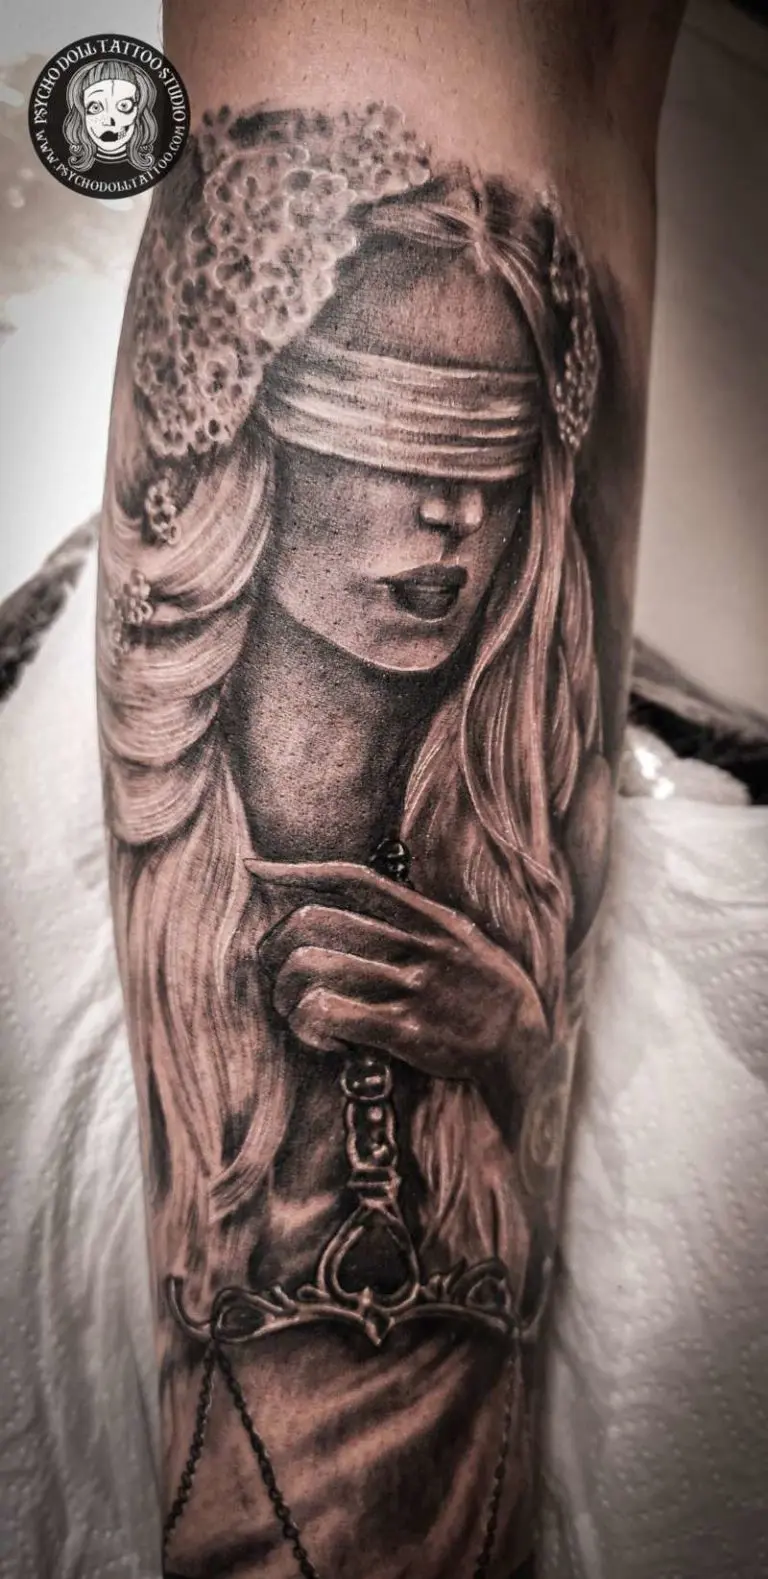 Alchemy Tattoo Collective on Twitter This one really inspires me  Repost from chelseatattoo  One more session to finish up this  black lady justice ladyjustice justice ladyjusticetattoo  blackwomen beautifulblackwomen 